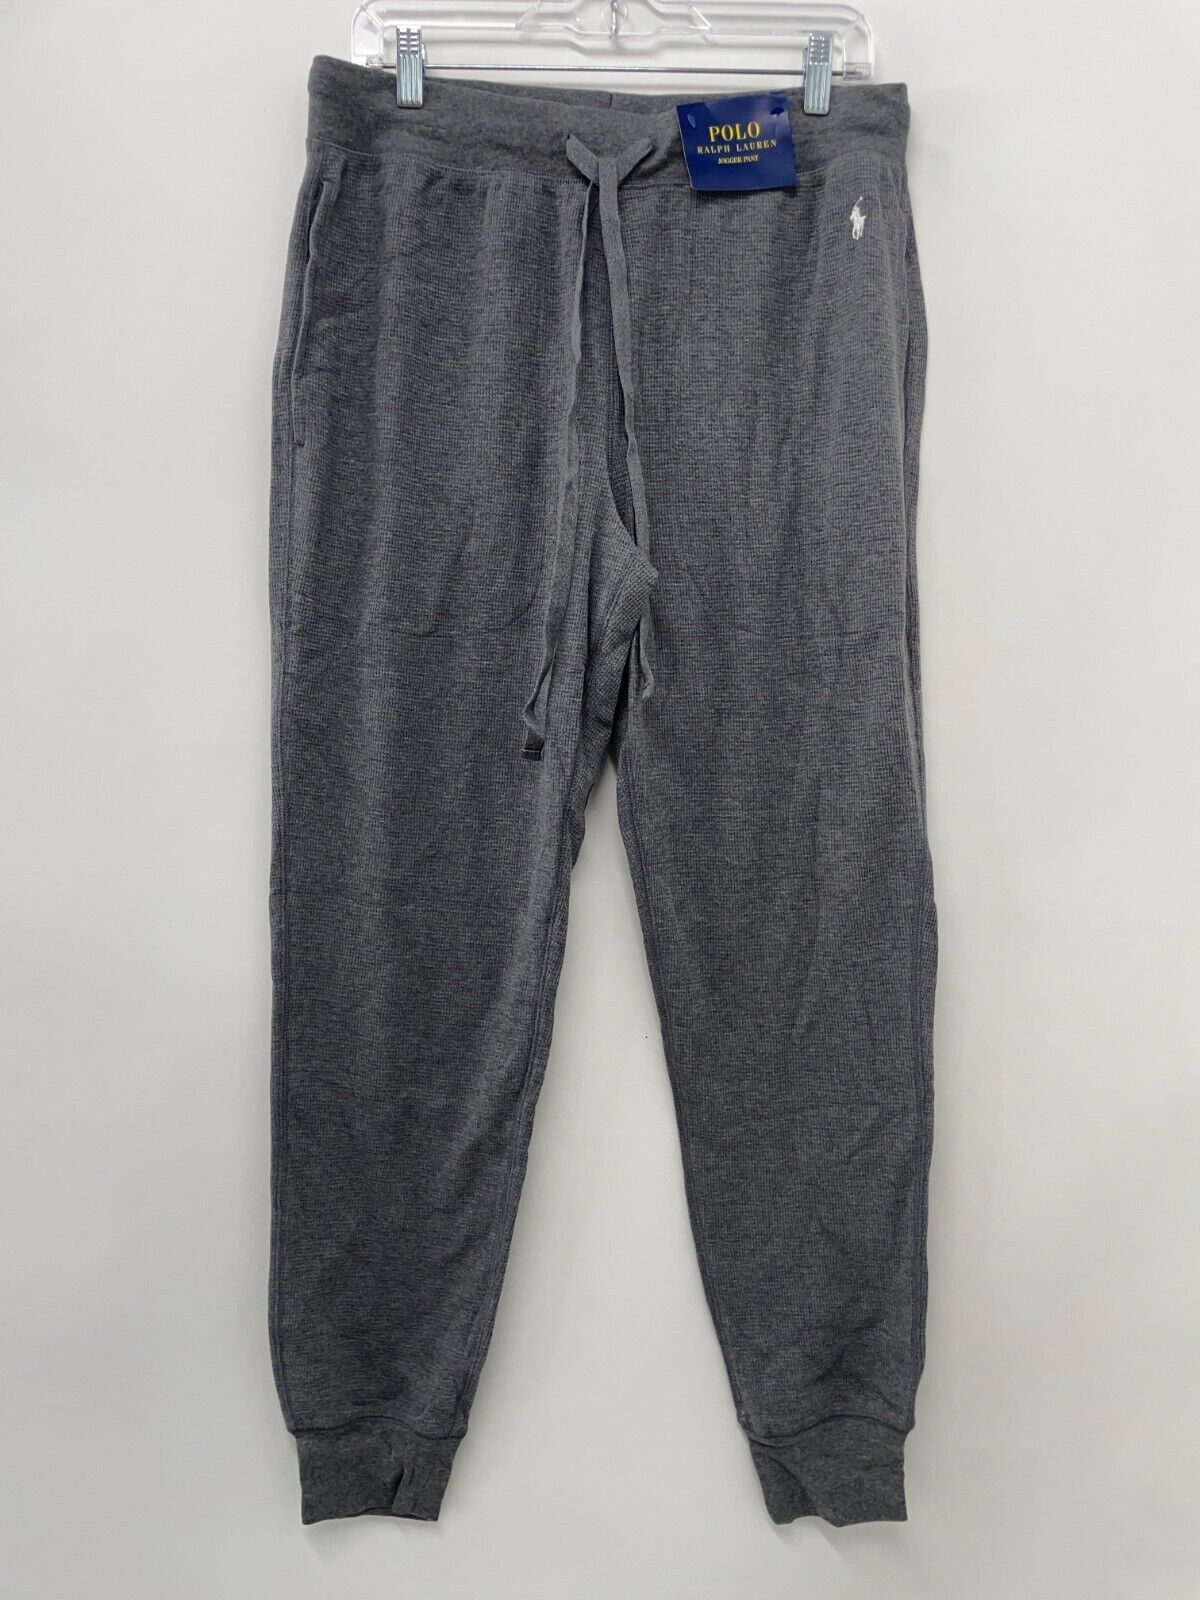 Polo Ralph Lauren Mens L Solid Waffle Knit Thermal Jogger Pajama